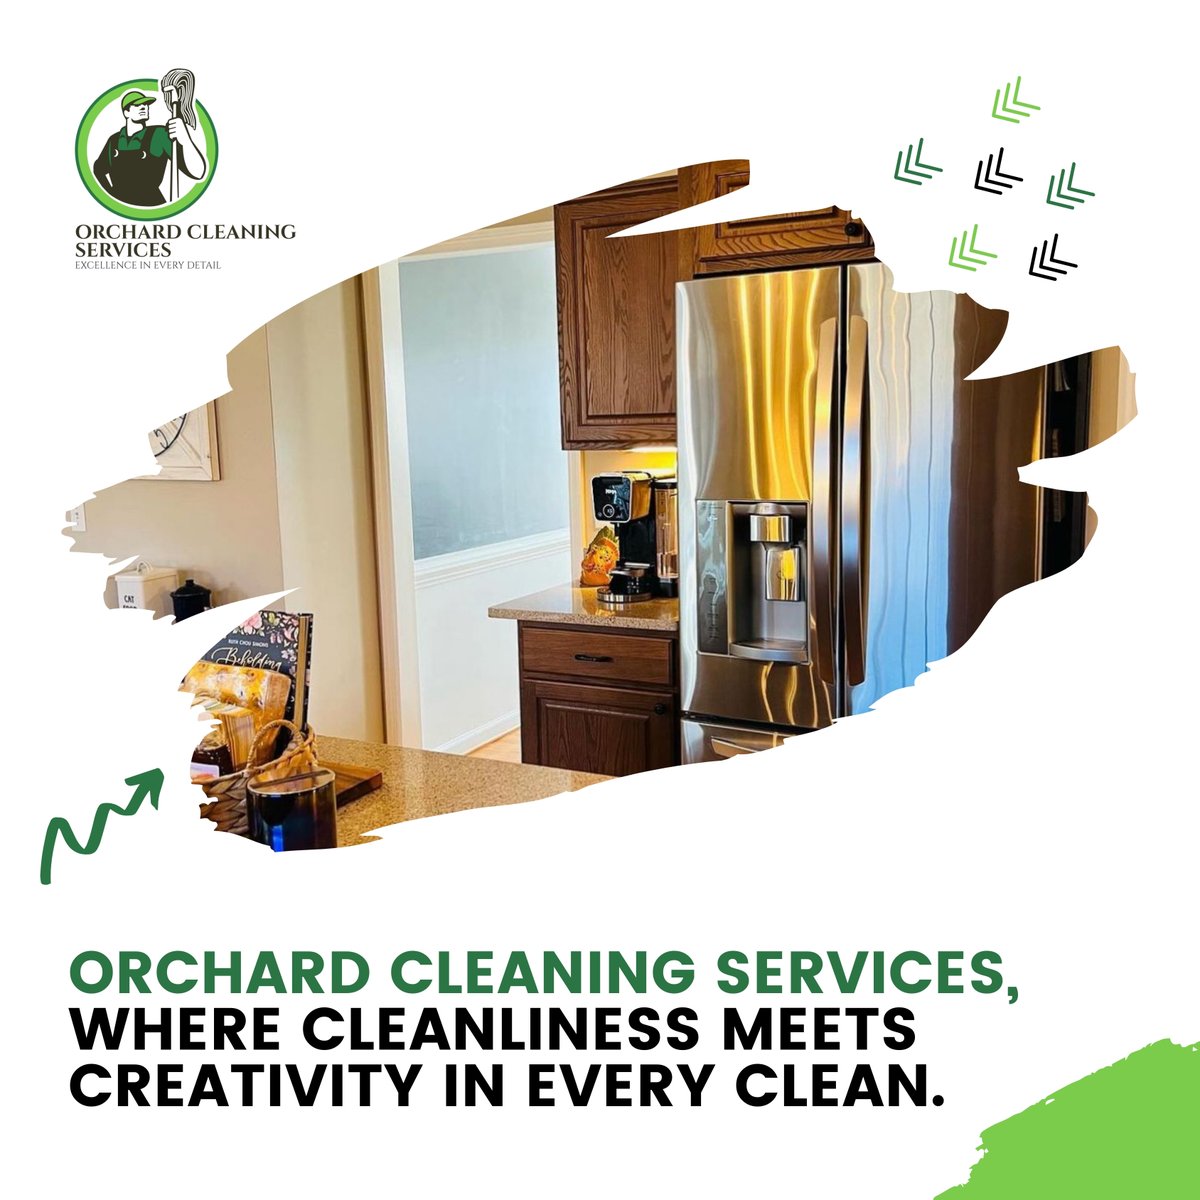 We believe that a clean home is not just about removing dirt and dust; it's about infusing each space with brilliance and beauty.

#cleanwithcreativity #artisticcleaning #brillianceandbeauty #dazzlingspaces #curatedcleanliness #inspiredliving #beyondthesurface